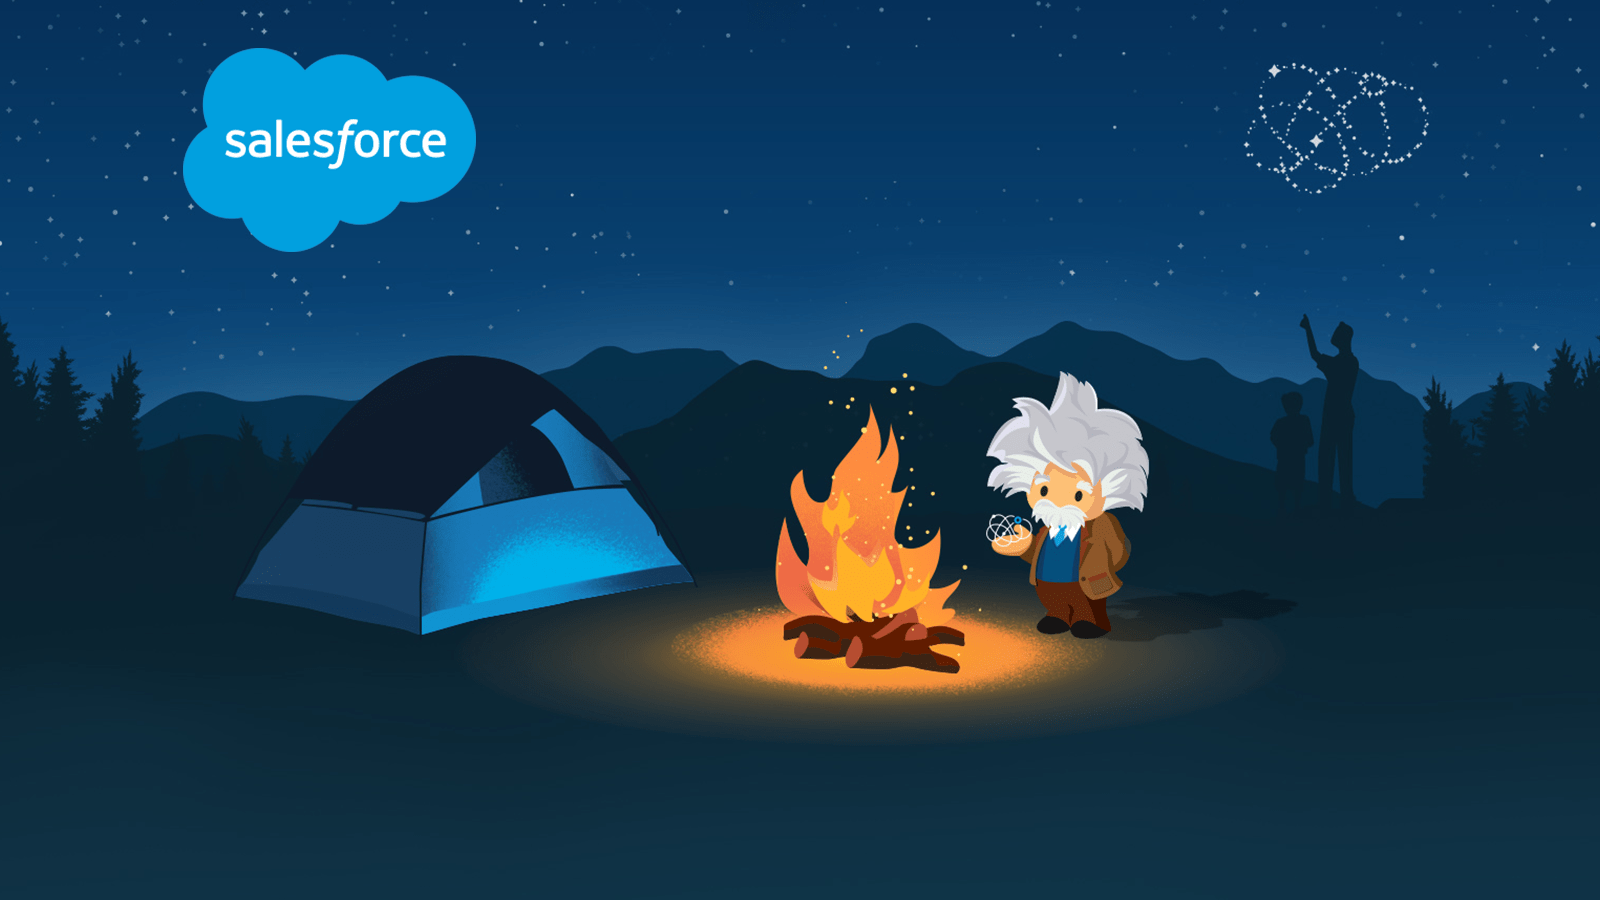 Salesforce Wallpapers - Top Free Salesforce Backgrounds - WallpaperAccess